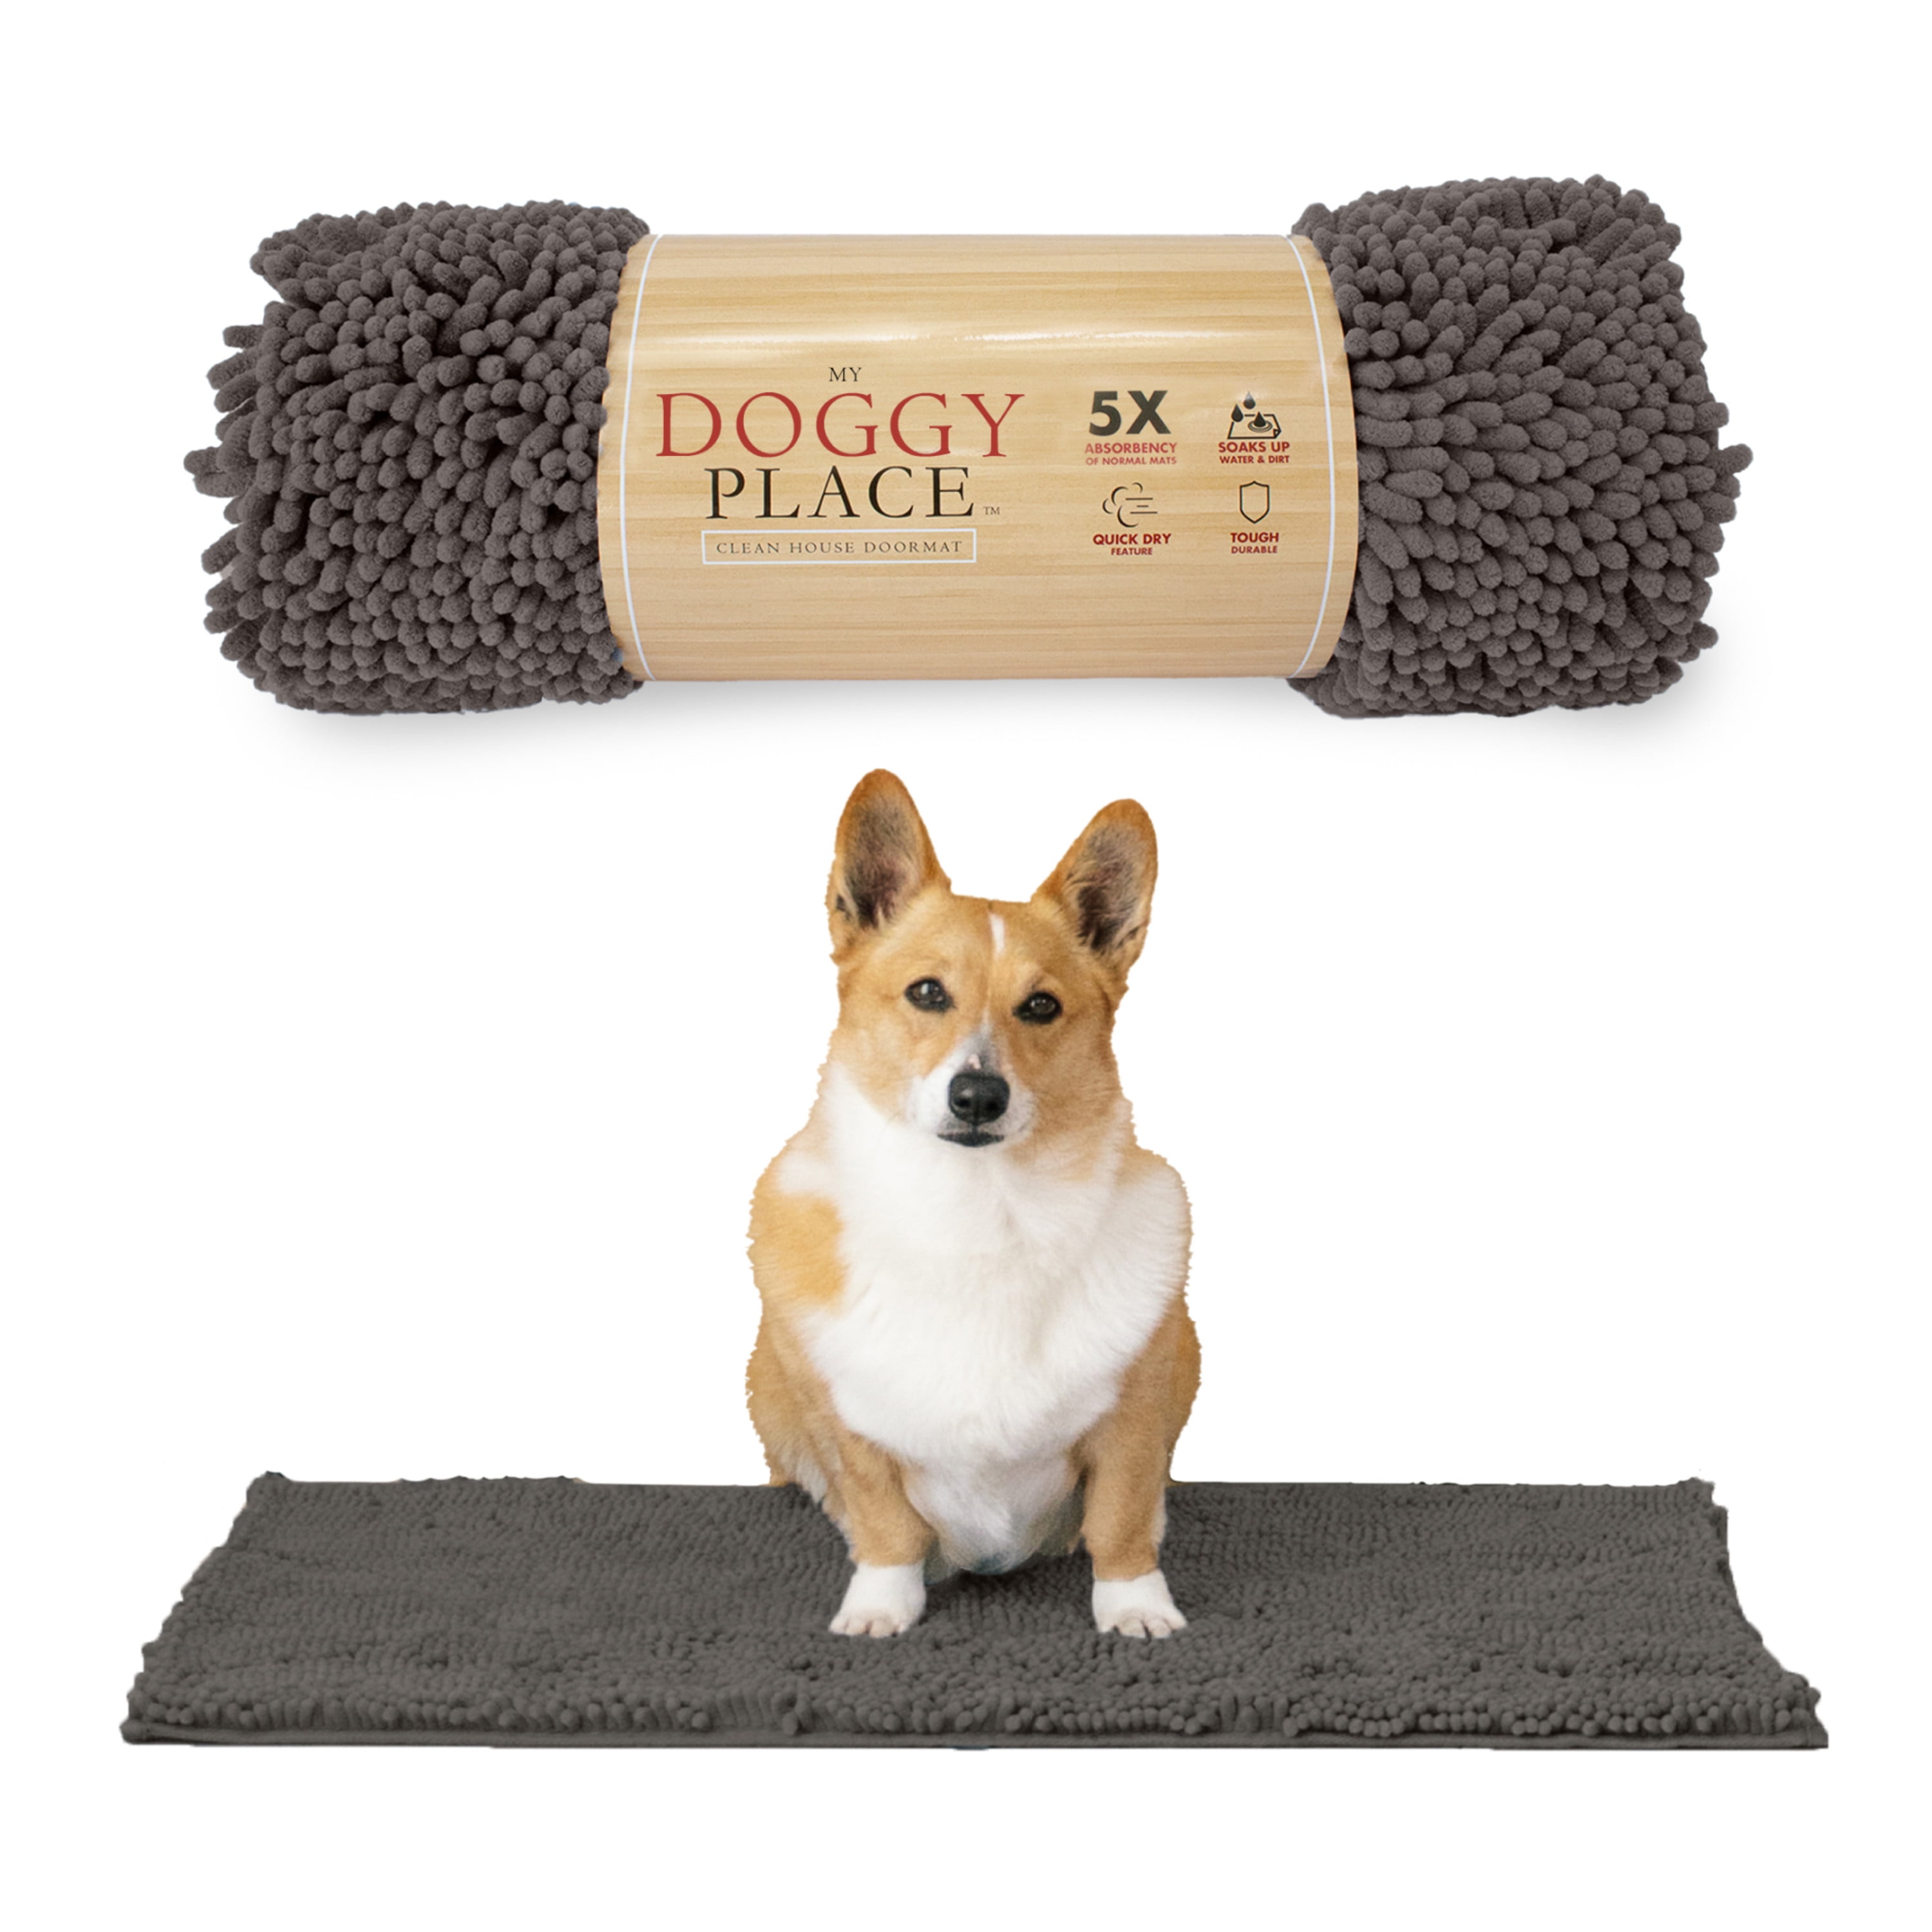 Style Basics Dog Mat For Muddy Paws - Anti-Slip Absorbent Door Rugs For Dogs  - Easy To Clean Indoor Outdoor Pet Mud Mats - 60 X